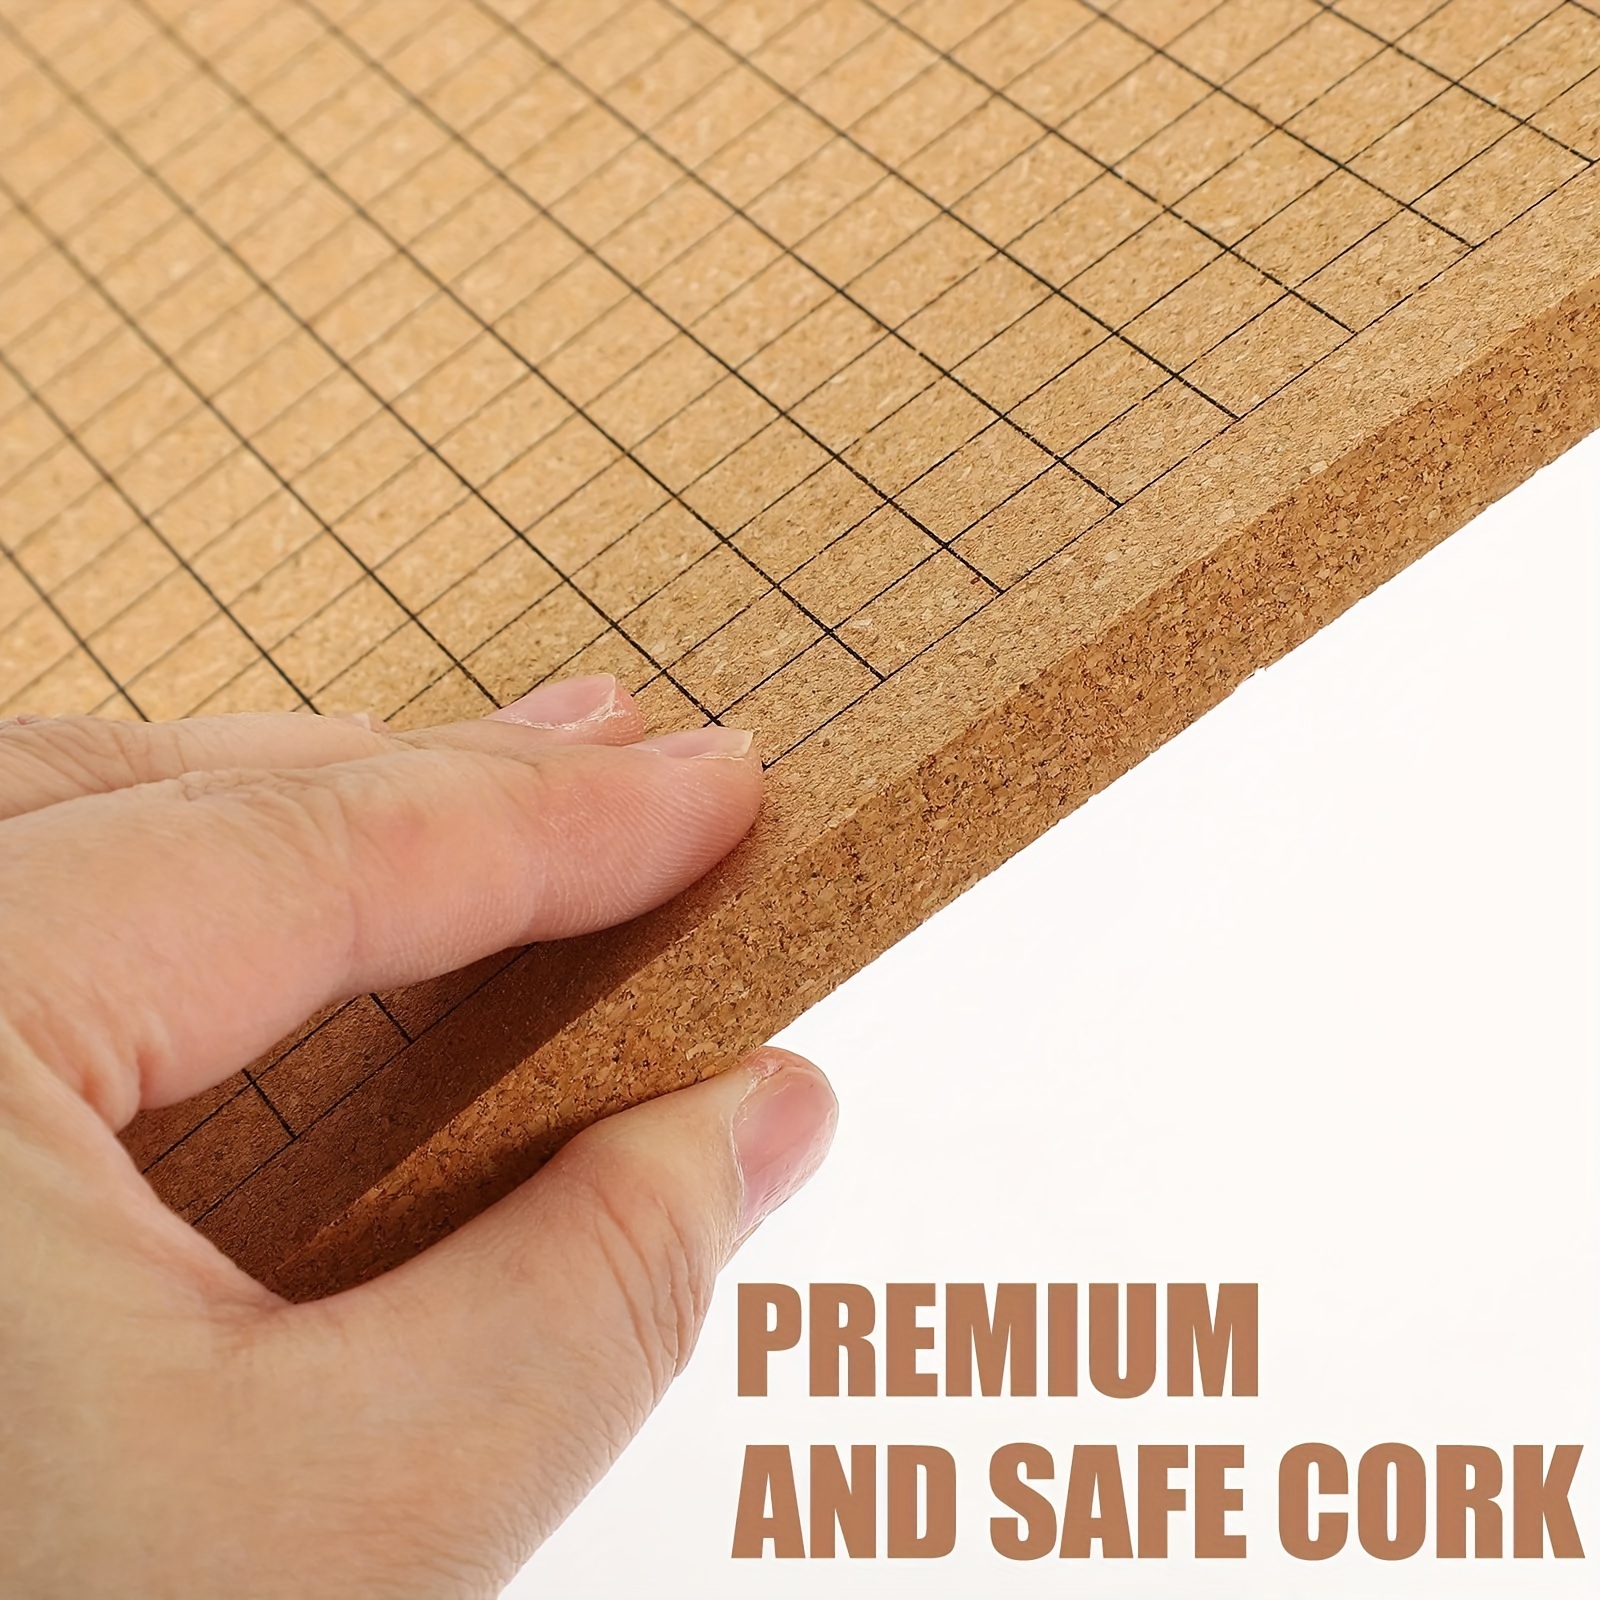 Macrame Board with Grids Double Sided Macrame Project Board with 50 T-pins  Reusable Macrame Cork Board Portable Lightweight 40×40cm 